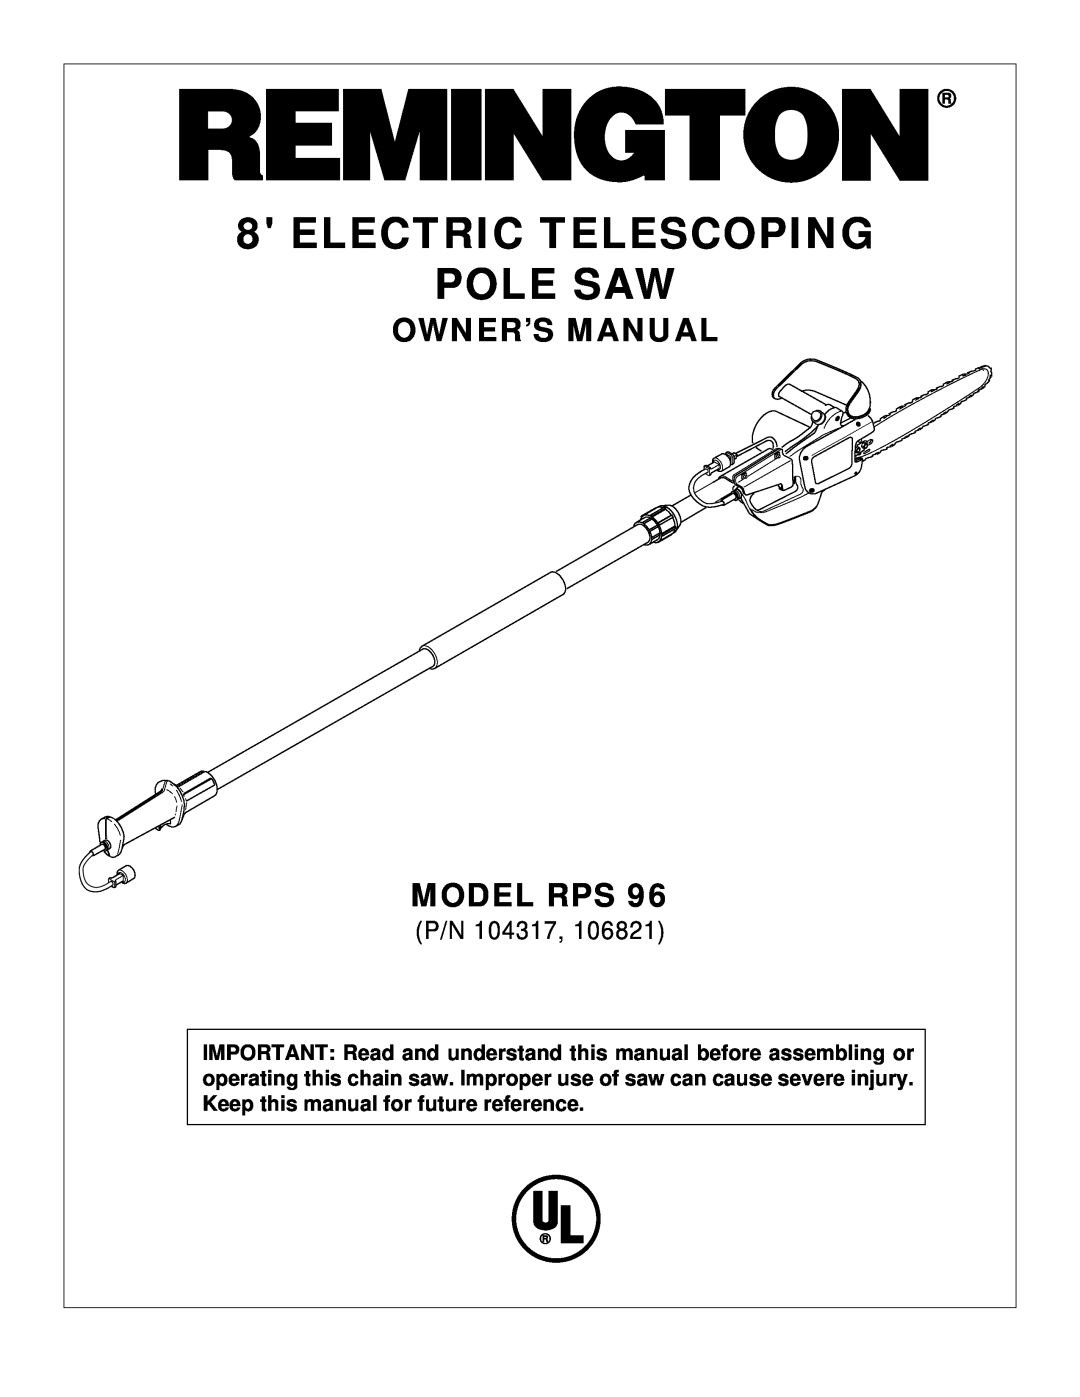 Desa RPS 96 owner manual Electric Telescoping Pole Saw, P/N 